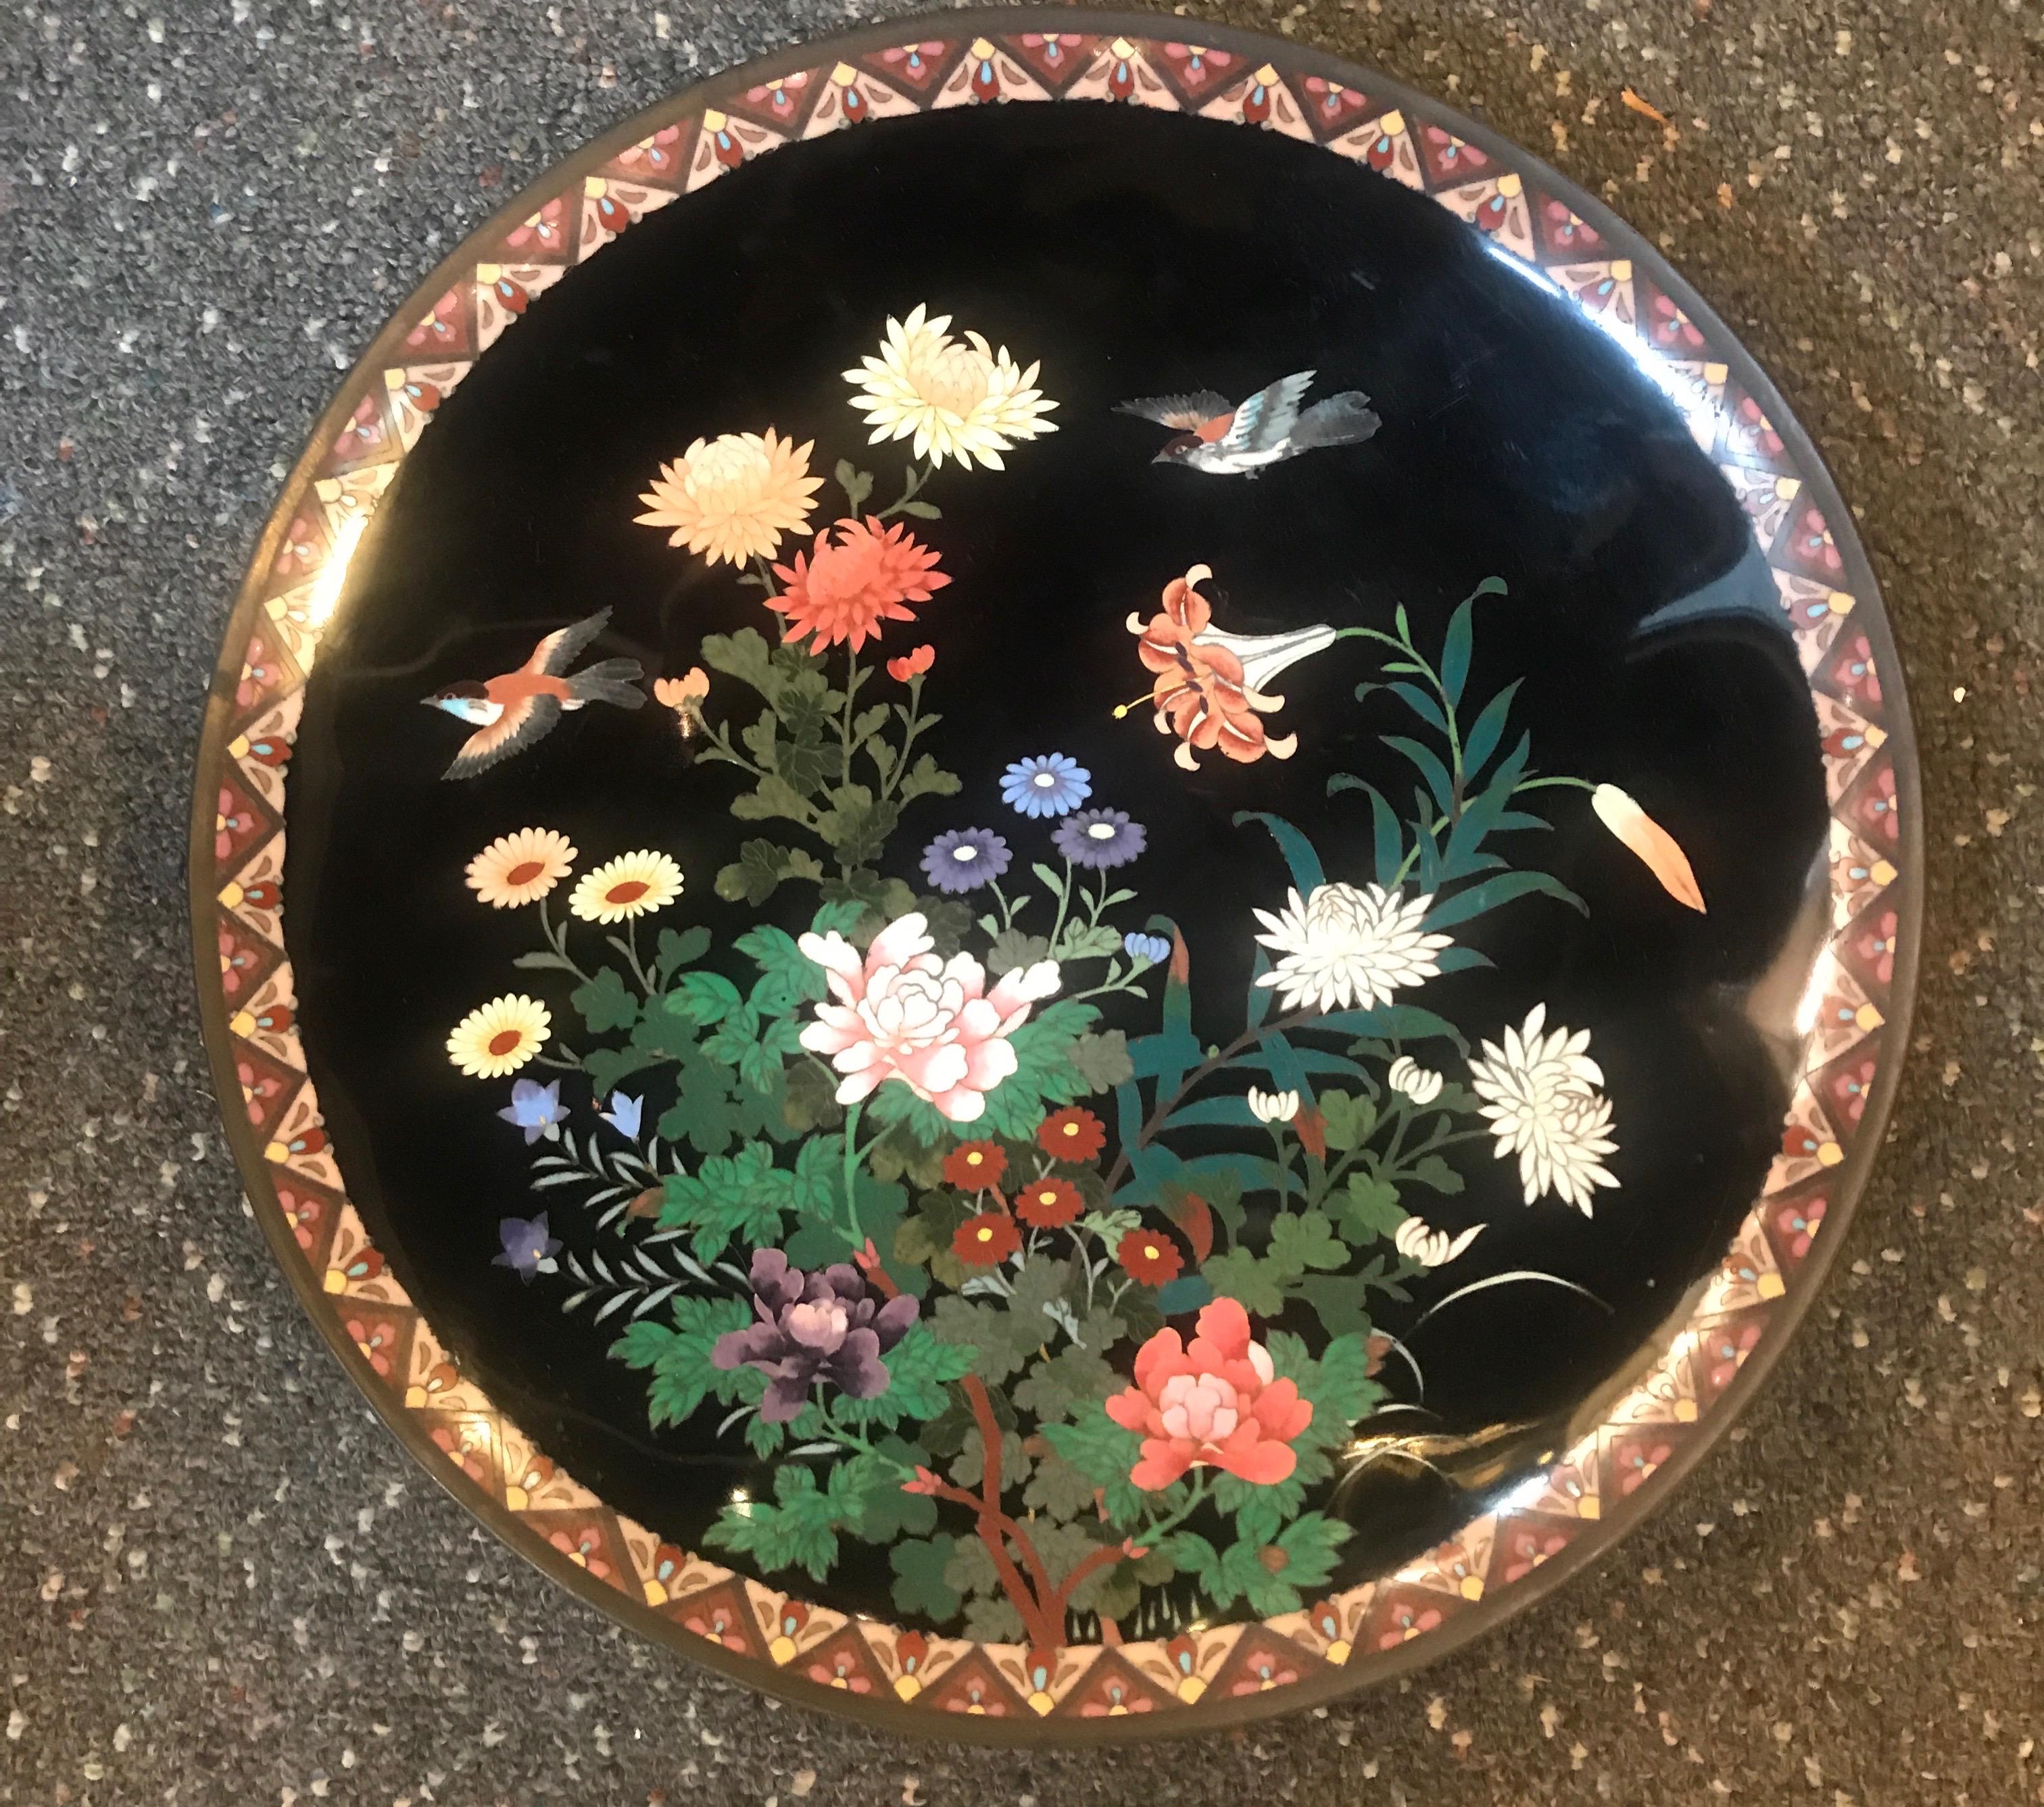 Lovely large Japanese cloisonné enamel charger Meiji Period (1868-1912). Measure: Large 14 inch.

Intricate enamel over brass cloisonné portraying a colorful floral and foliage motif with flying birds enclosed in a geometrical patterned border. Rare